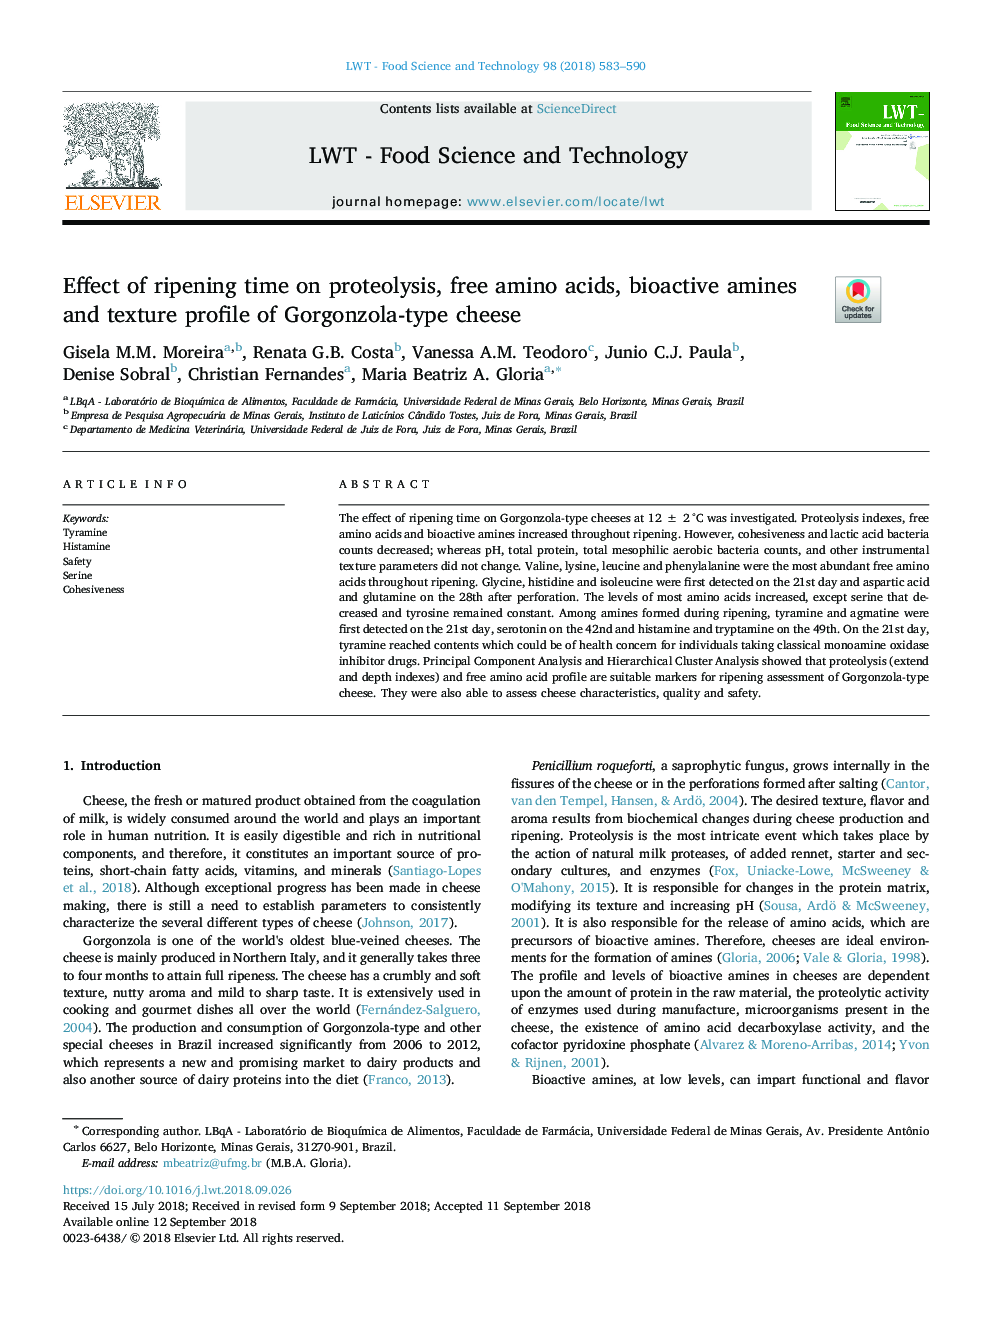 Effect of ripening time on proteolysis, free amino acids, bioactive amines and texture profile of Gorgonzola-type cheese